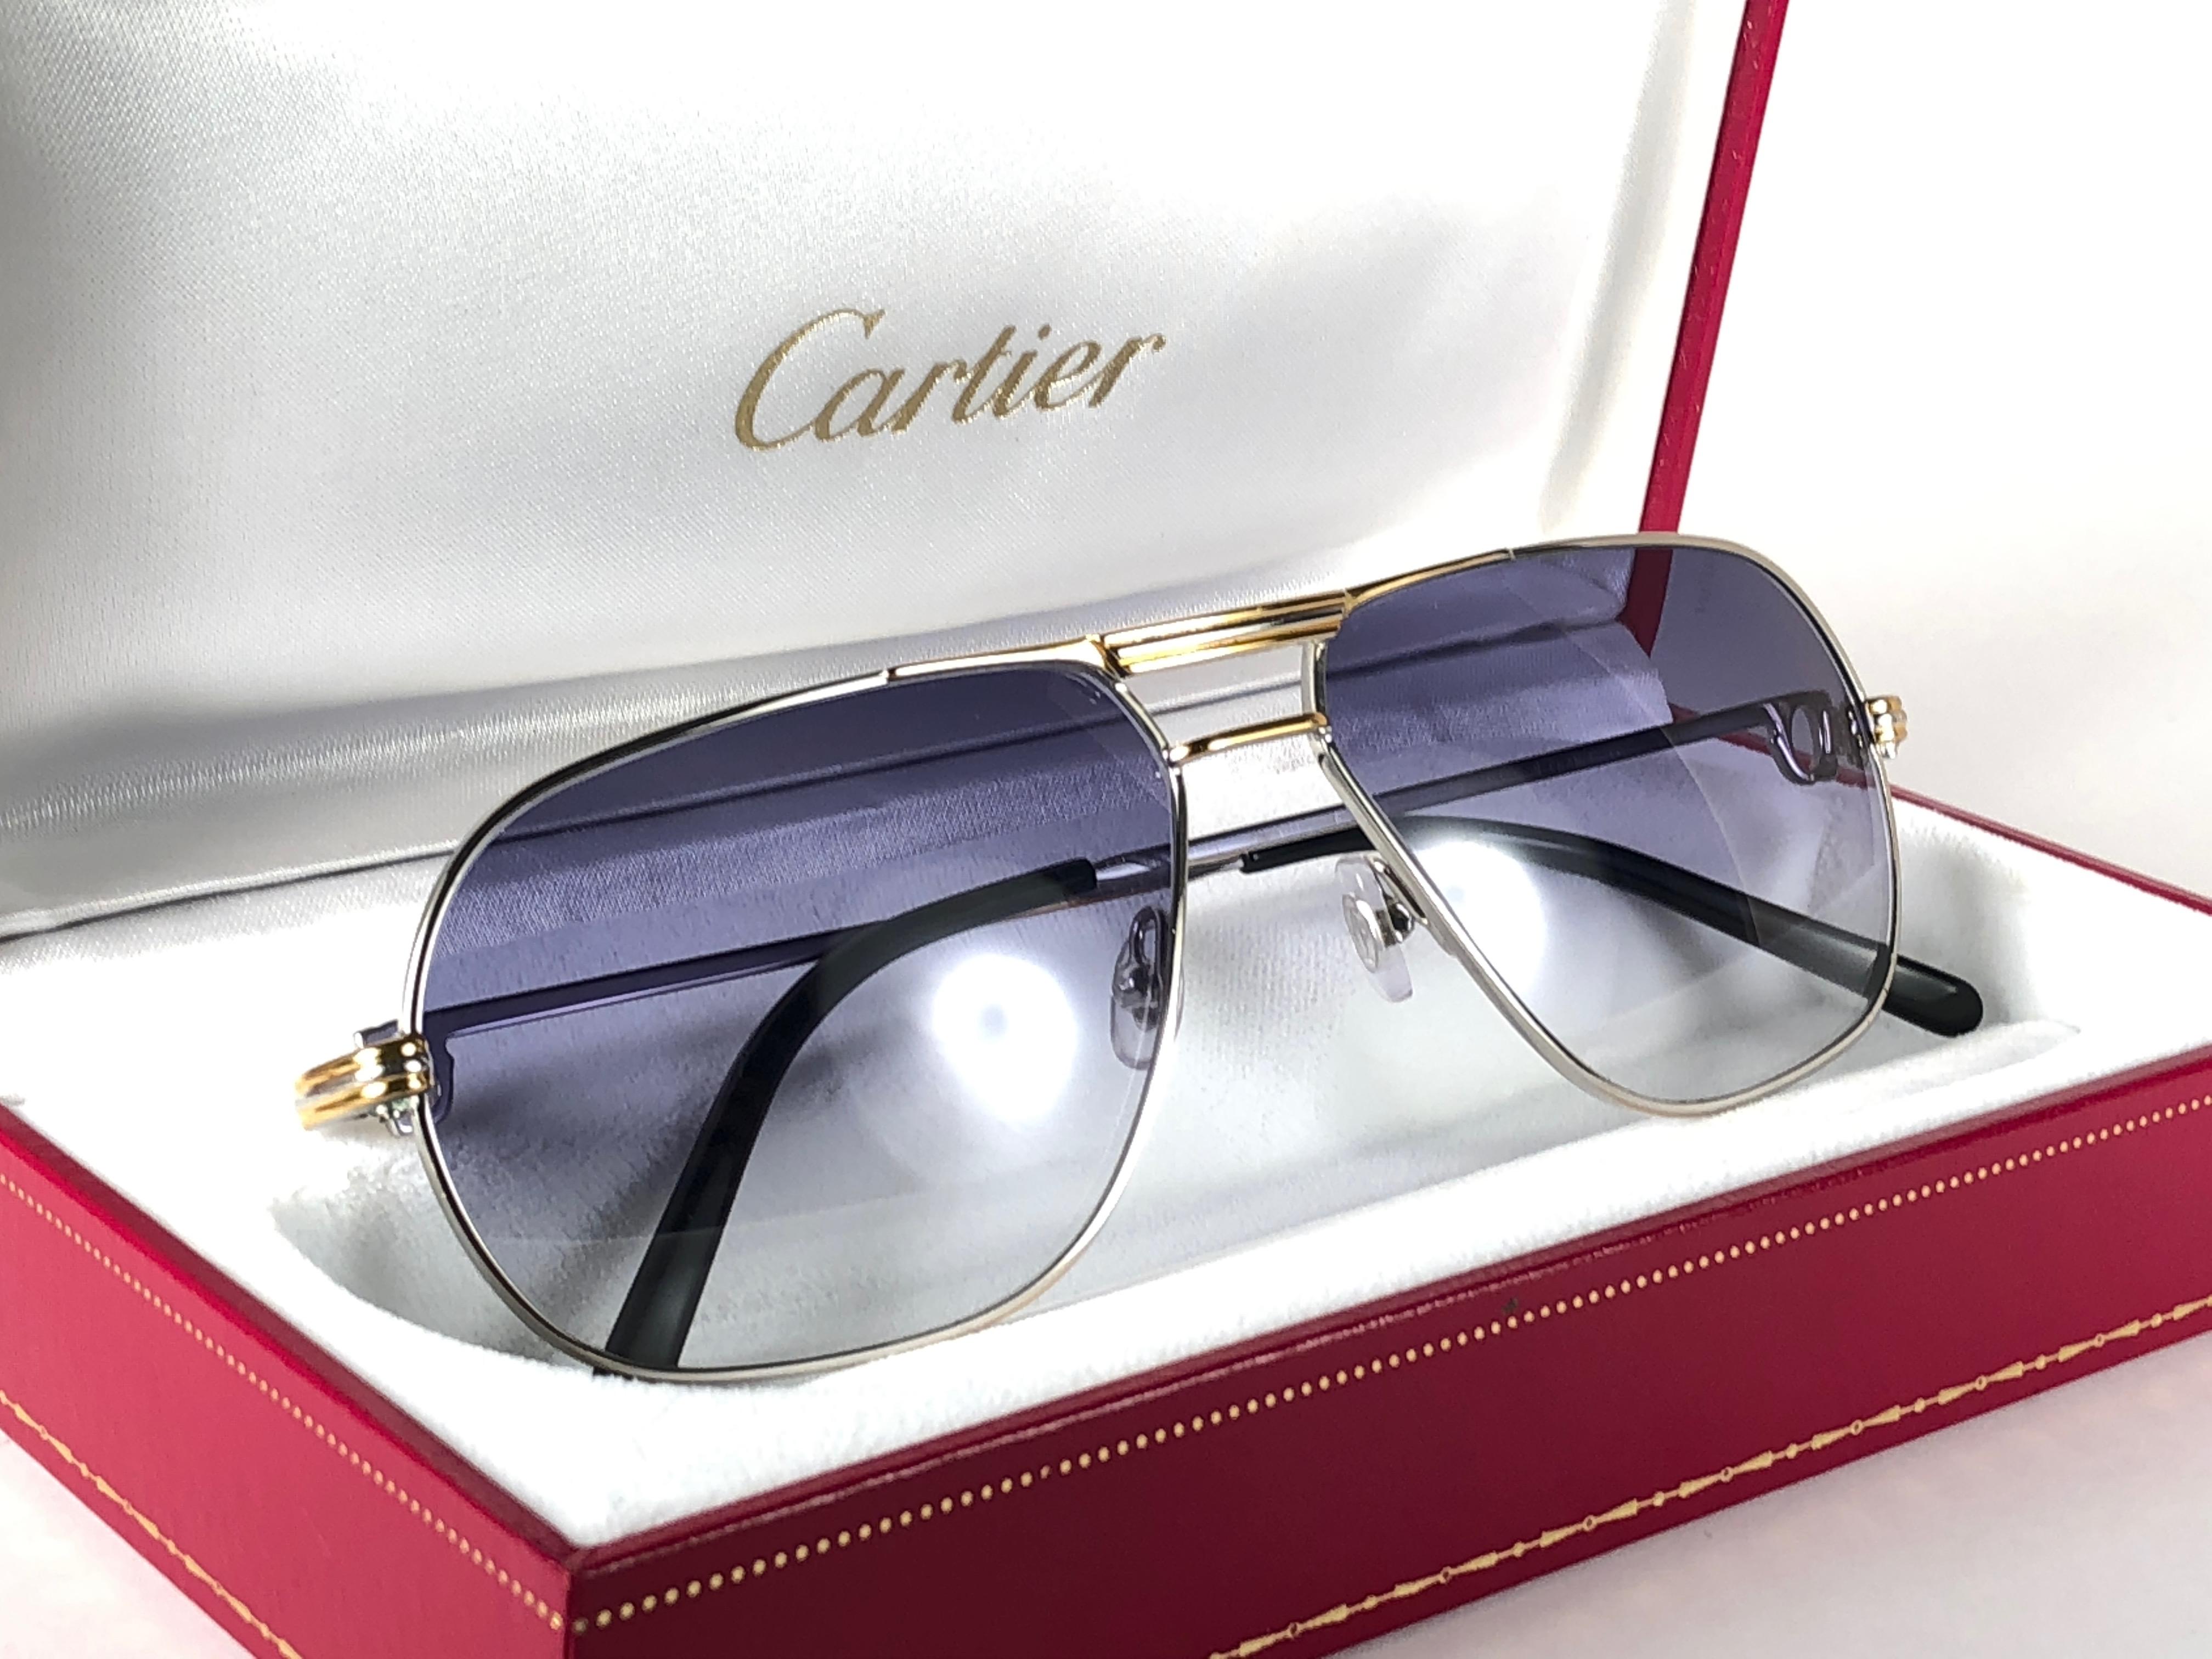  1988 Cartier Aviator Tank Platinum sunglasses with blue gradient (uv protection)lenses. 
Frame is with the front and sides in yellow and white gold. All hallmarks. Cartier gold signs on the ear paddles. Both arms sport the C from Cartier on the